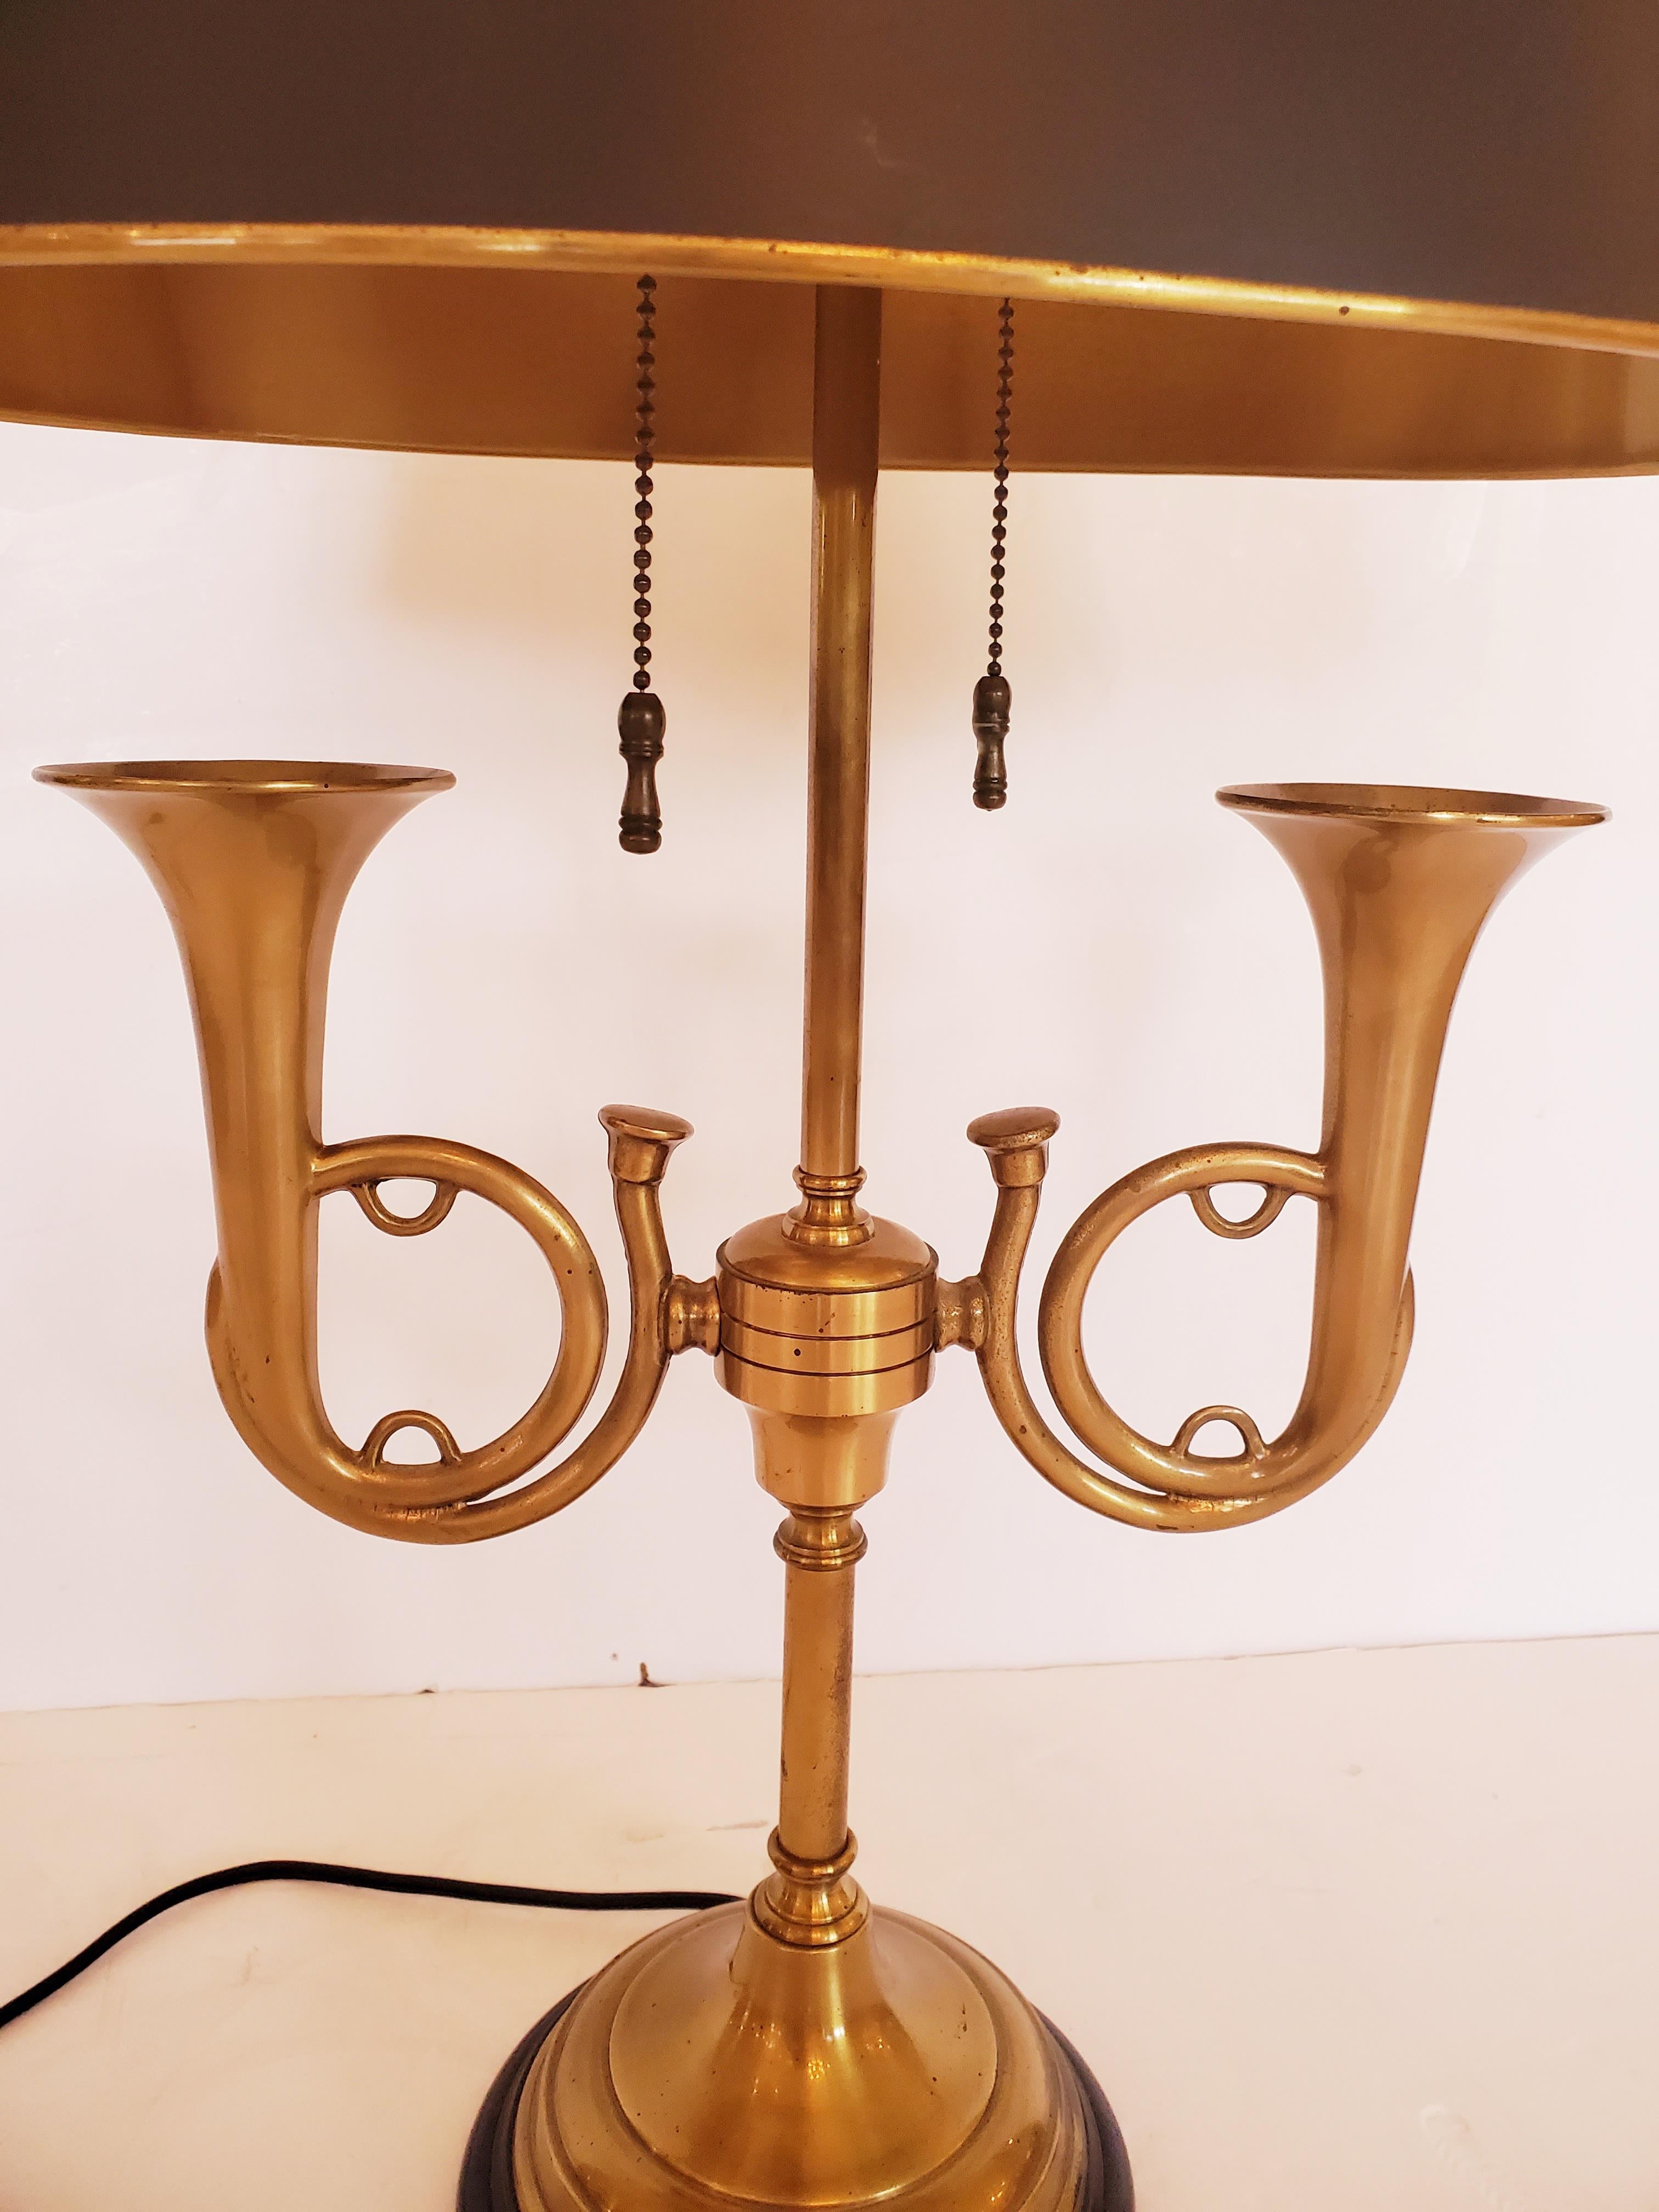 North American Classic Horn Motife Brass Table Lamp For Sale